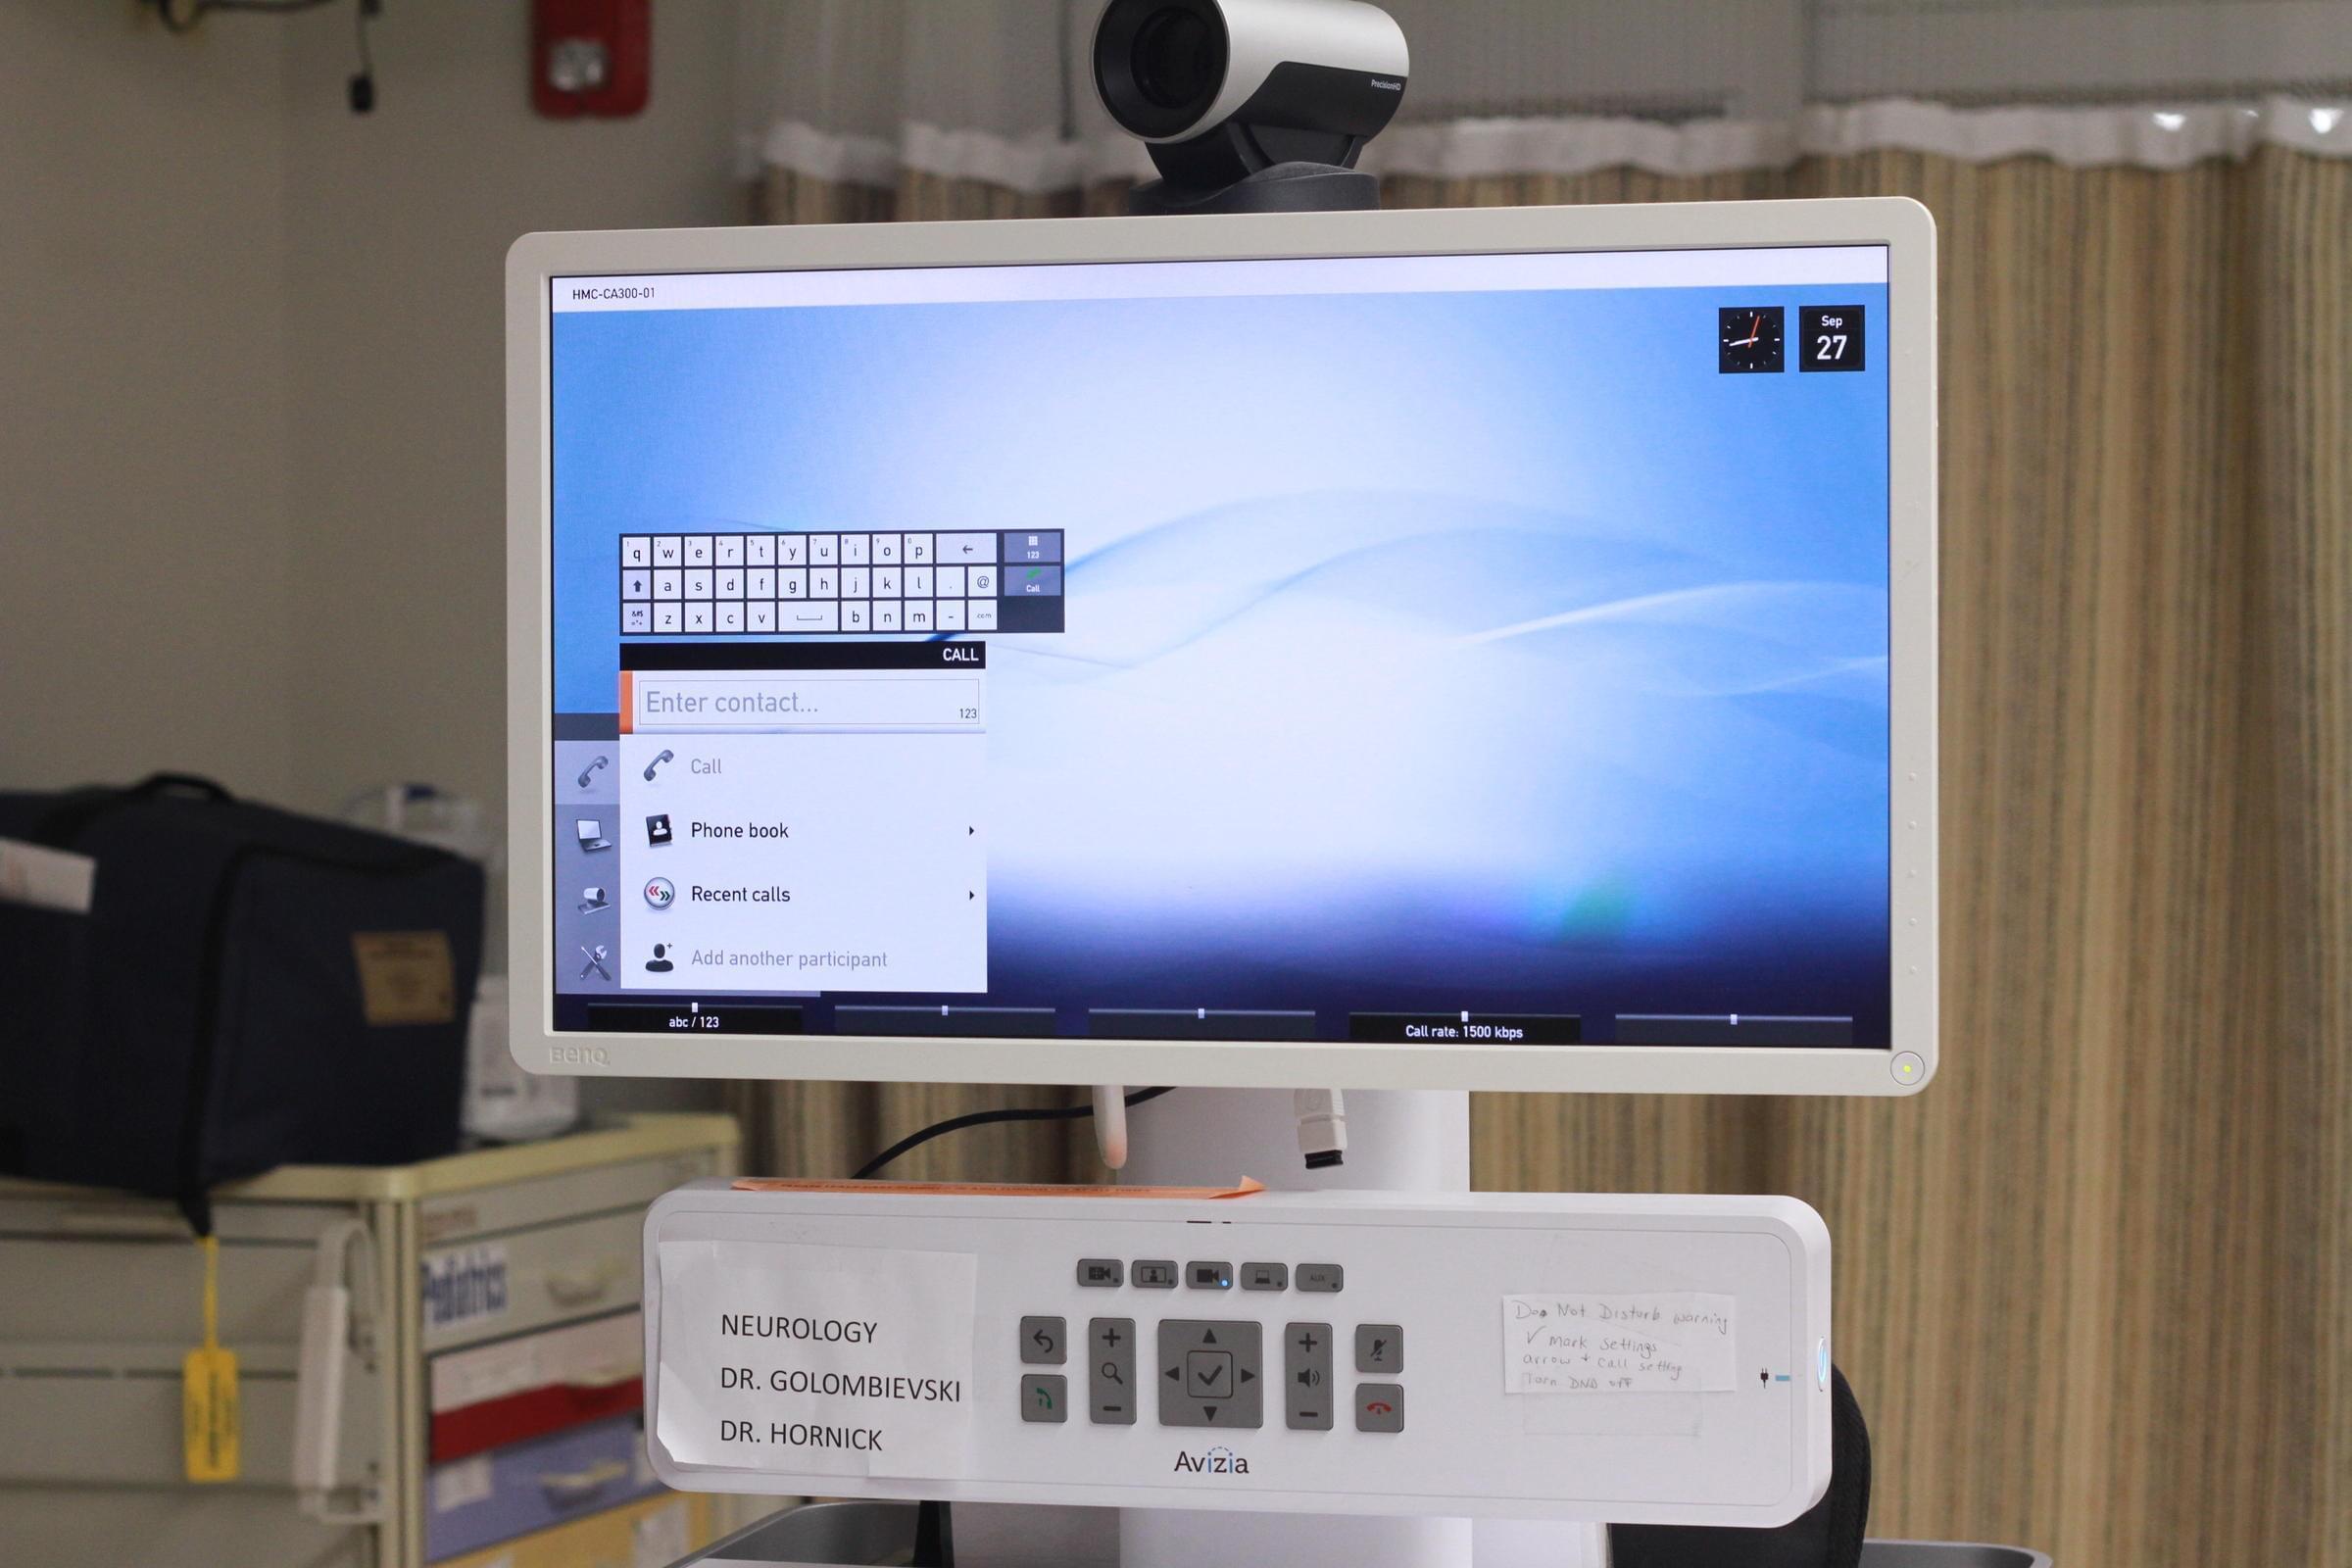 This console lets the ER communicate with specialists, no matter where they are.